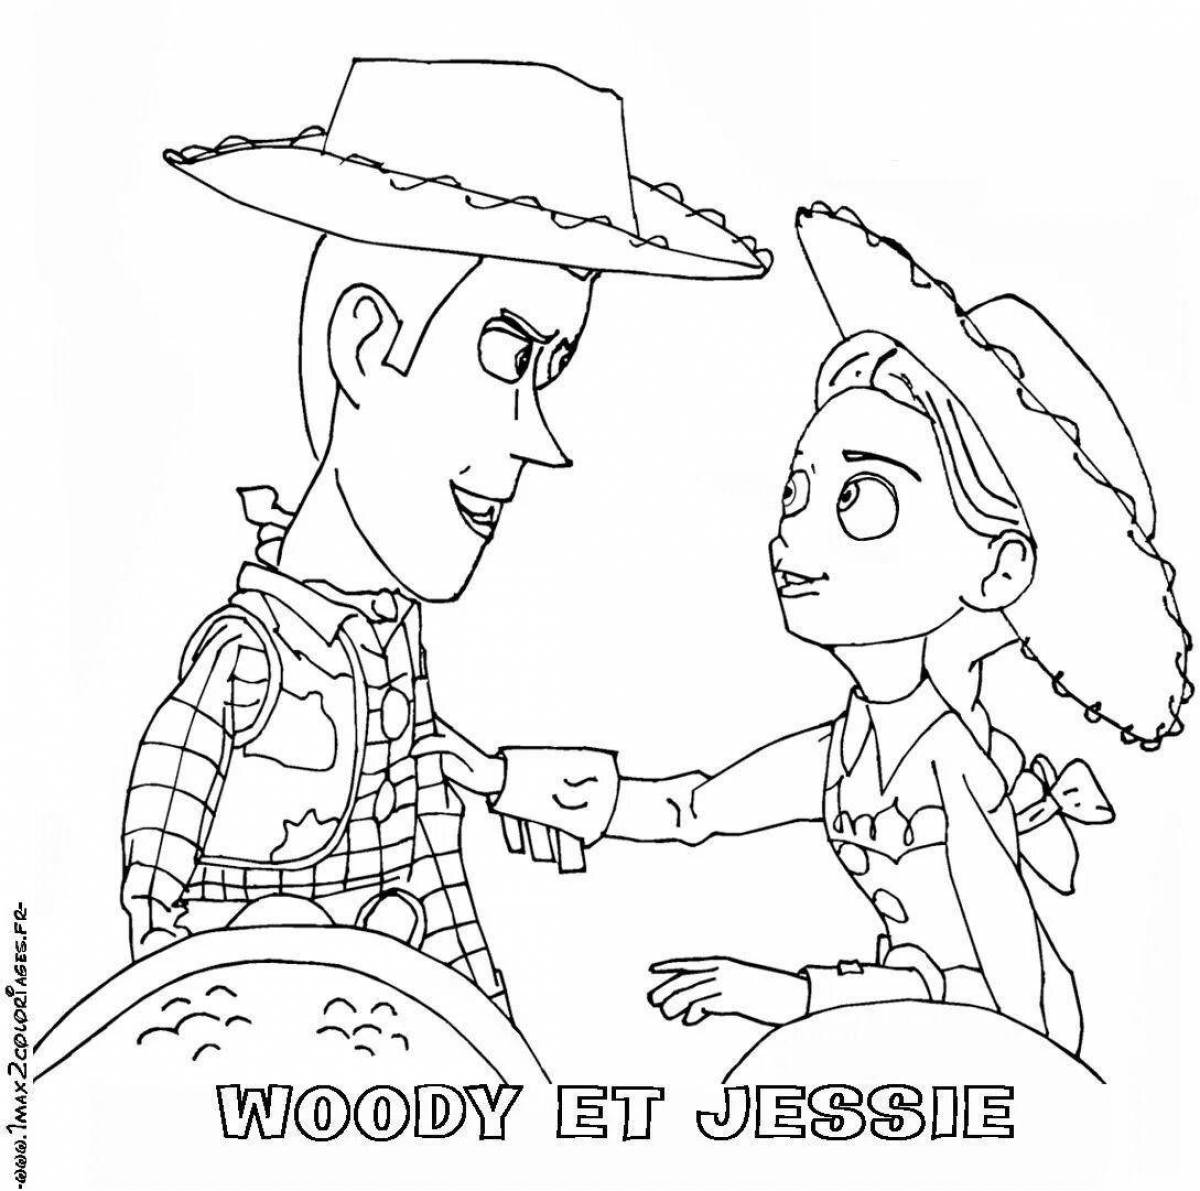 Jesse's magical toy story coloring book